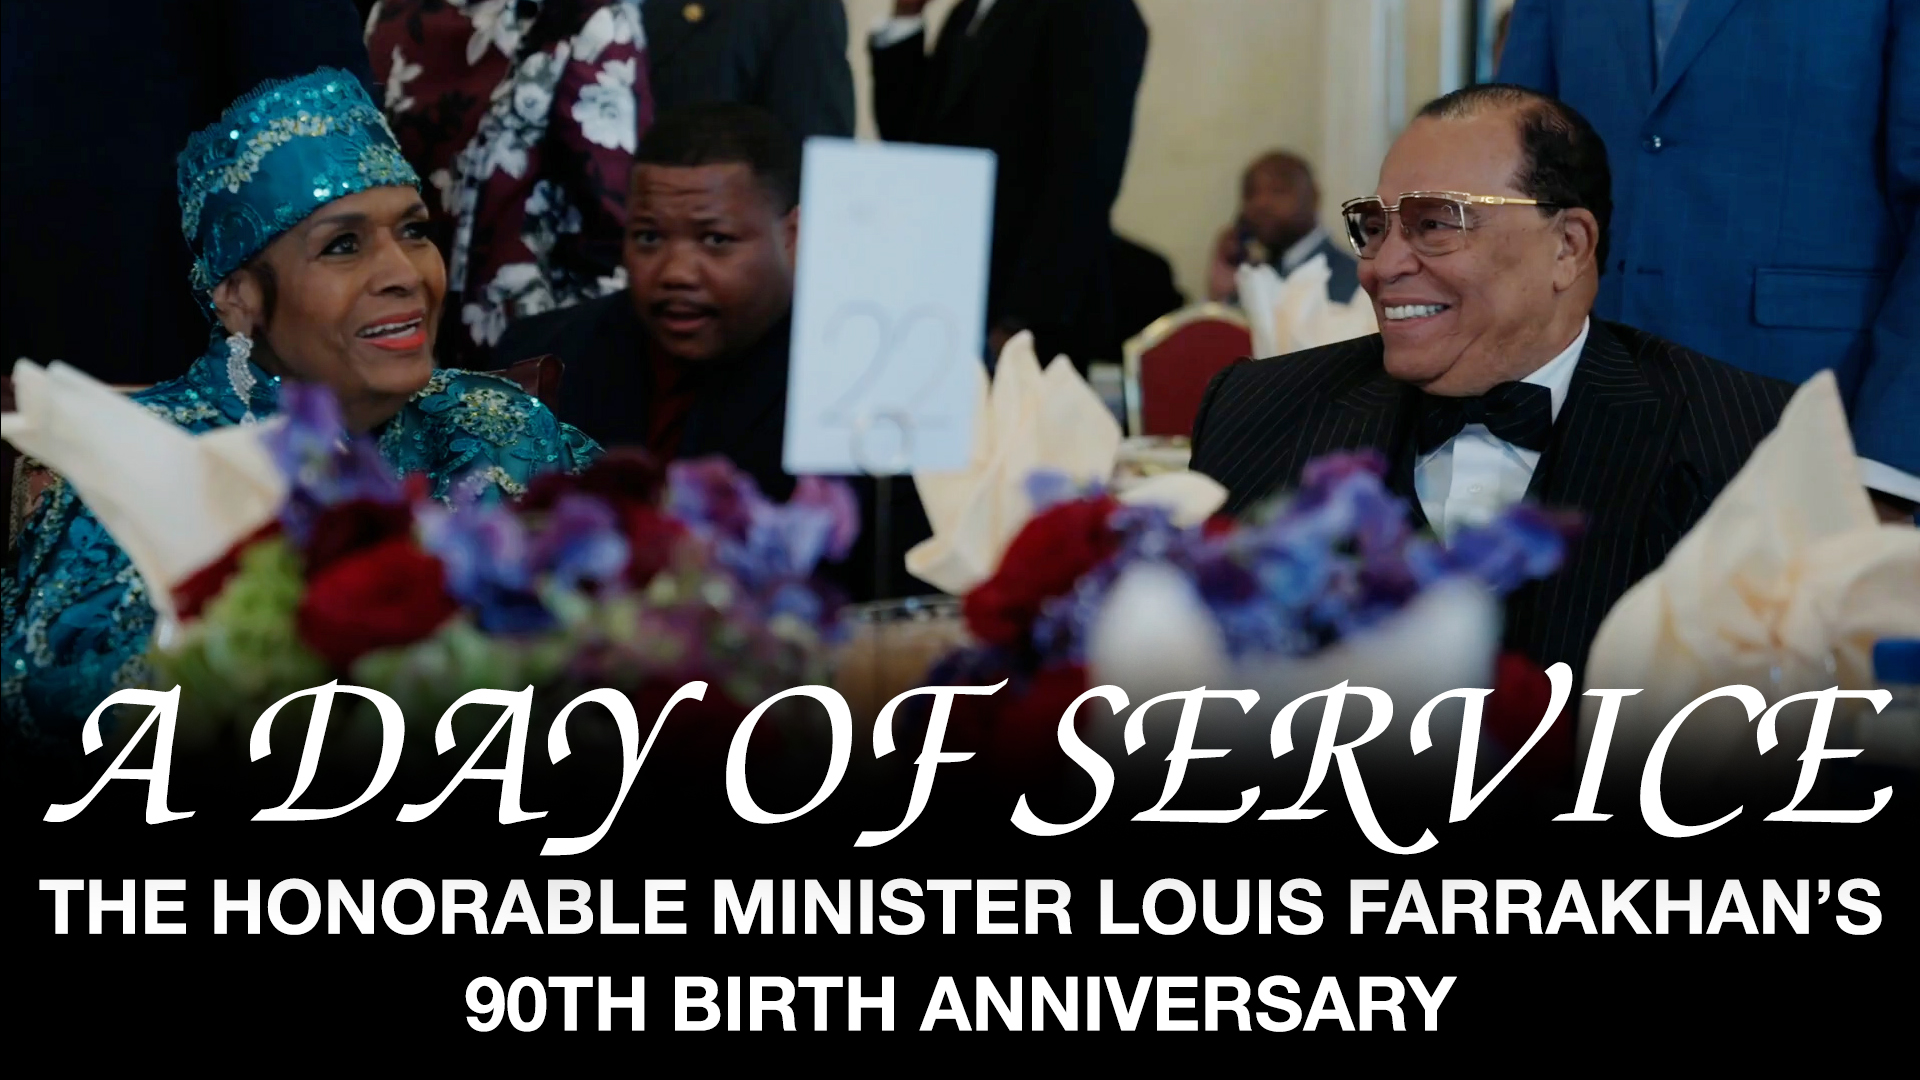 Acts of Kindness: A Tribute The 90th Birth Anniversary of Minister Farrakhan